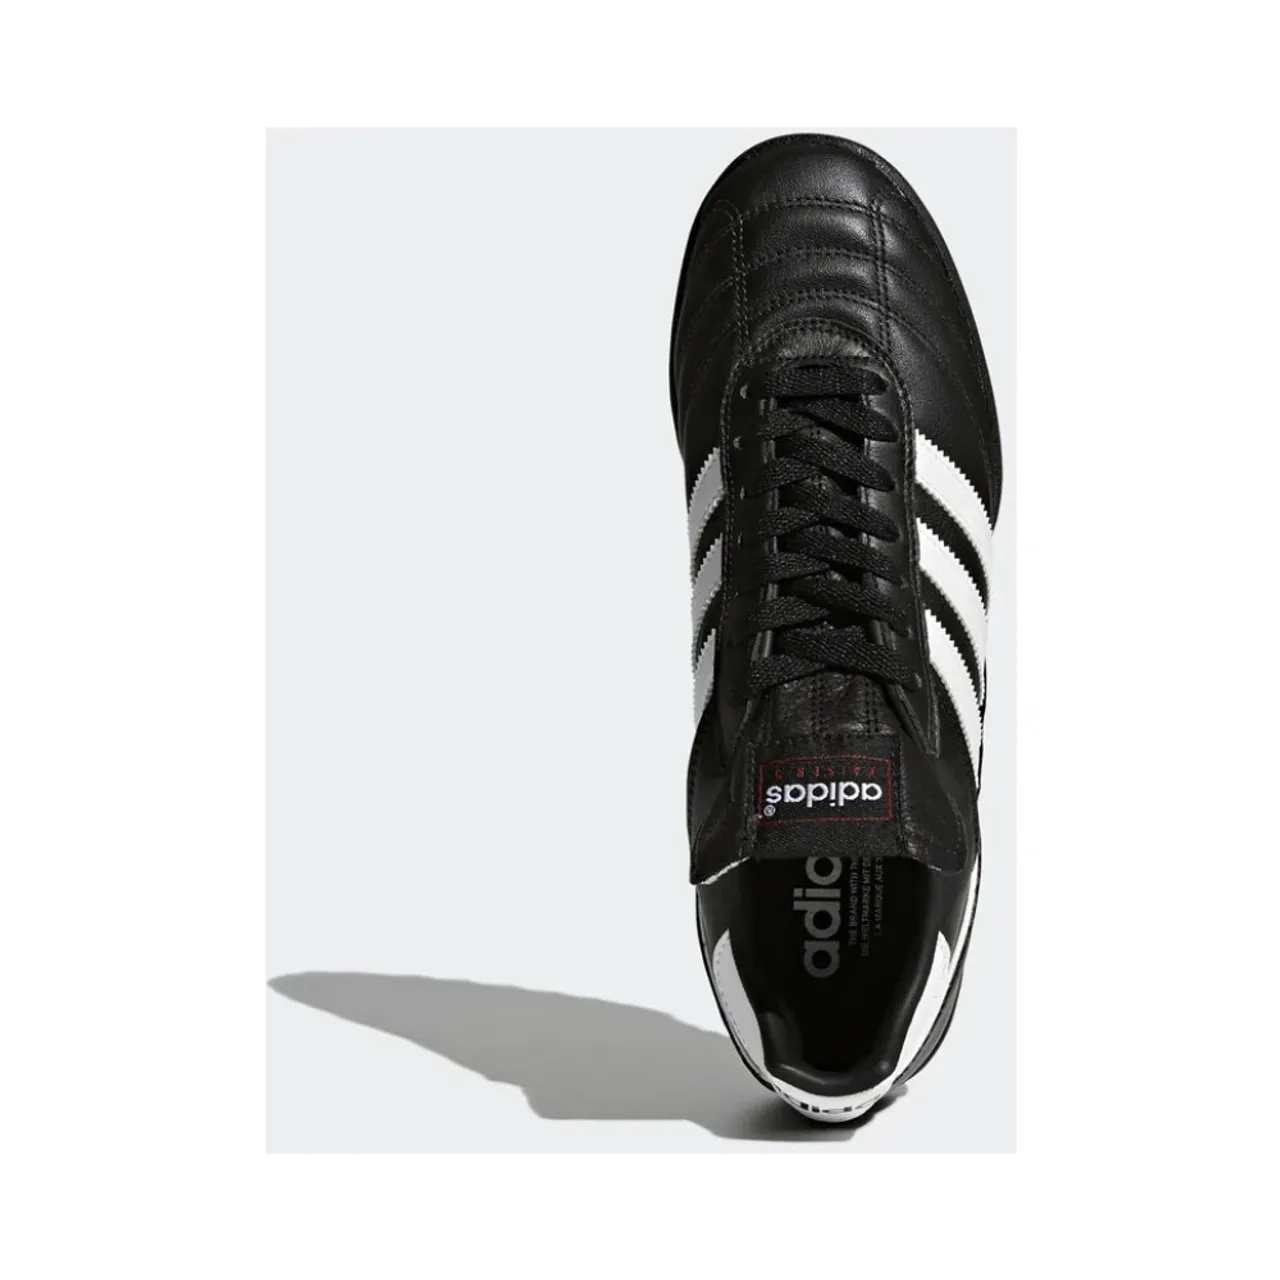 Adidas , Classic Leather Soccer Shoes ,Black male, Sizes: